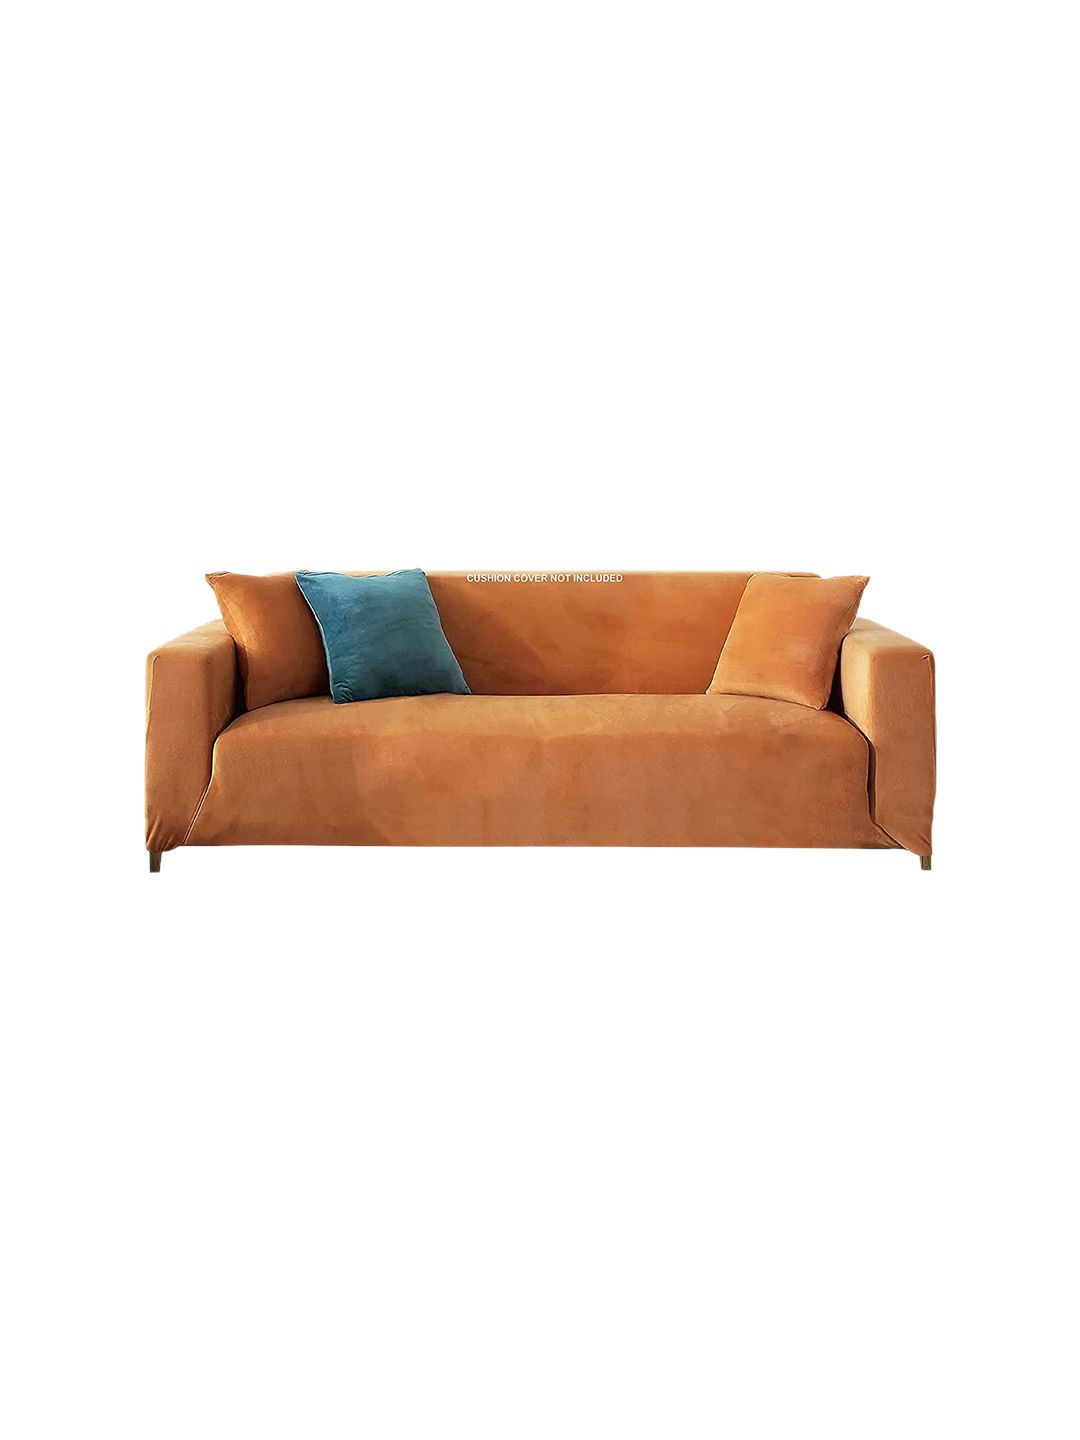 HOUSE OF QUIRK Tan Solid 1-Seater Sofa Cover Price in India